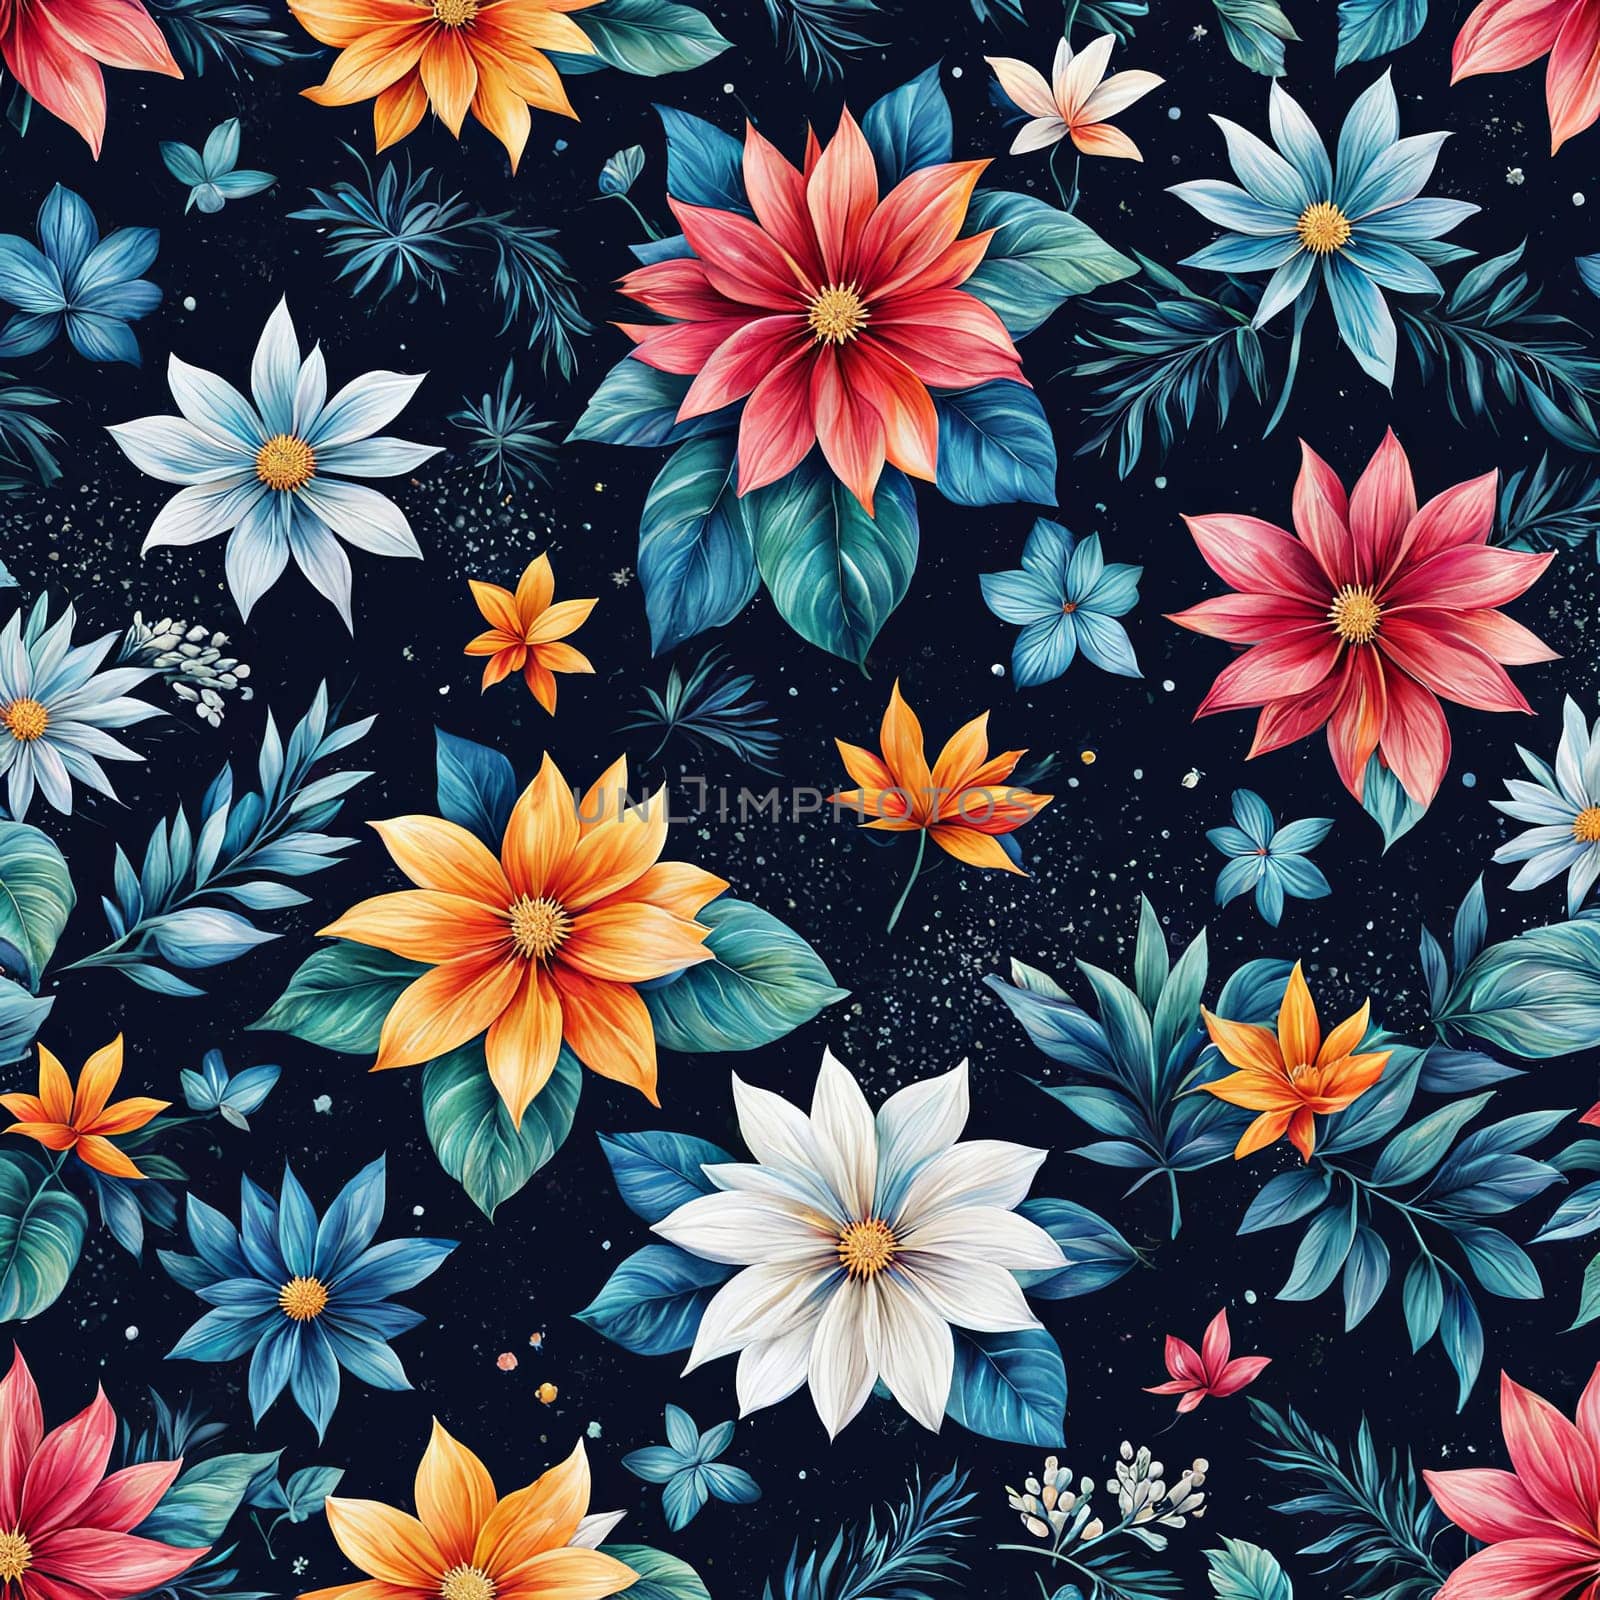 Bright colors of flowers pop out against black background, enhancing their beauty, making them focal point of image. For interior design, decoration, advertising, web design, as illustration for book. by Angelsmoon